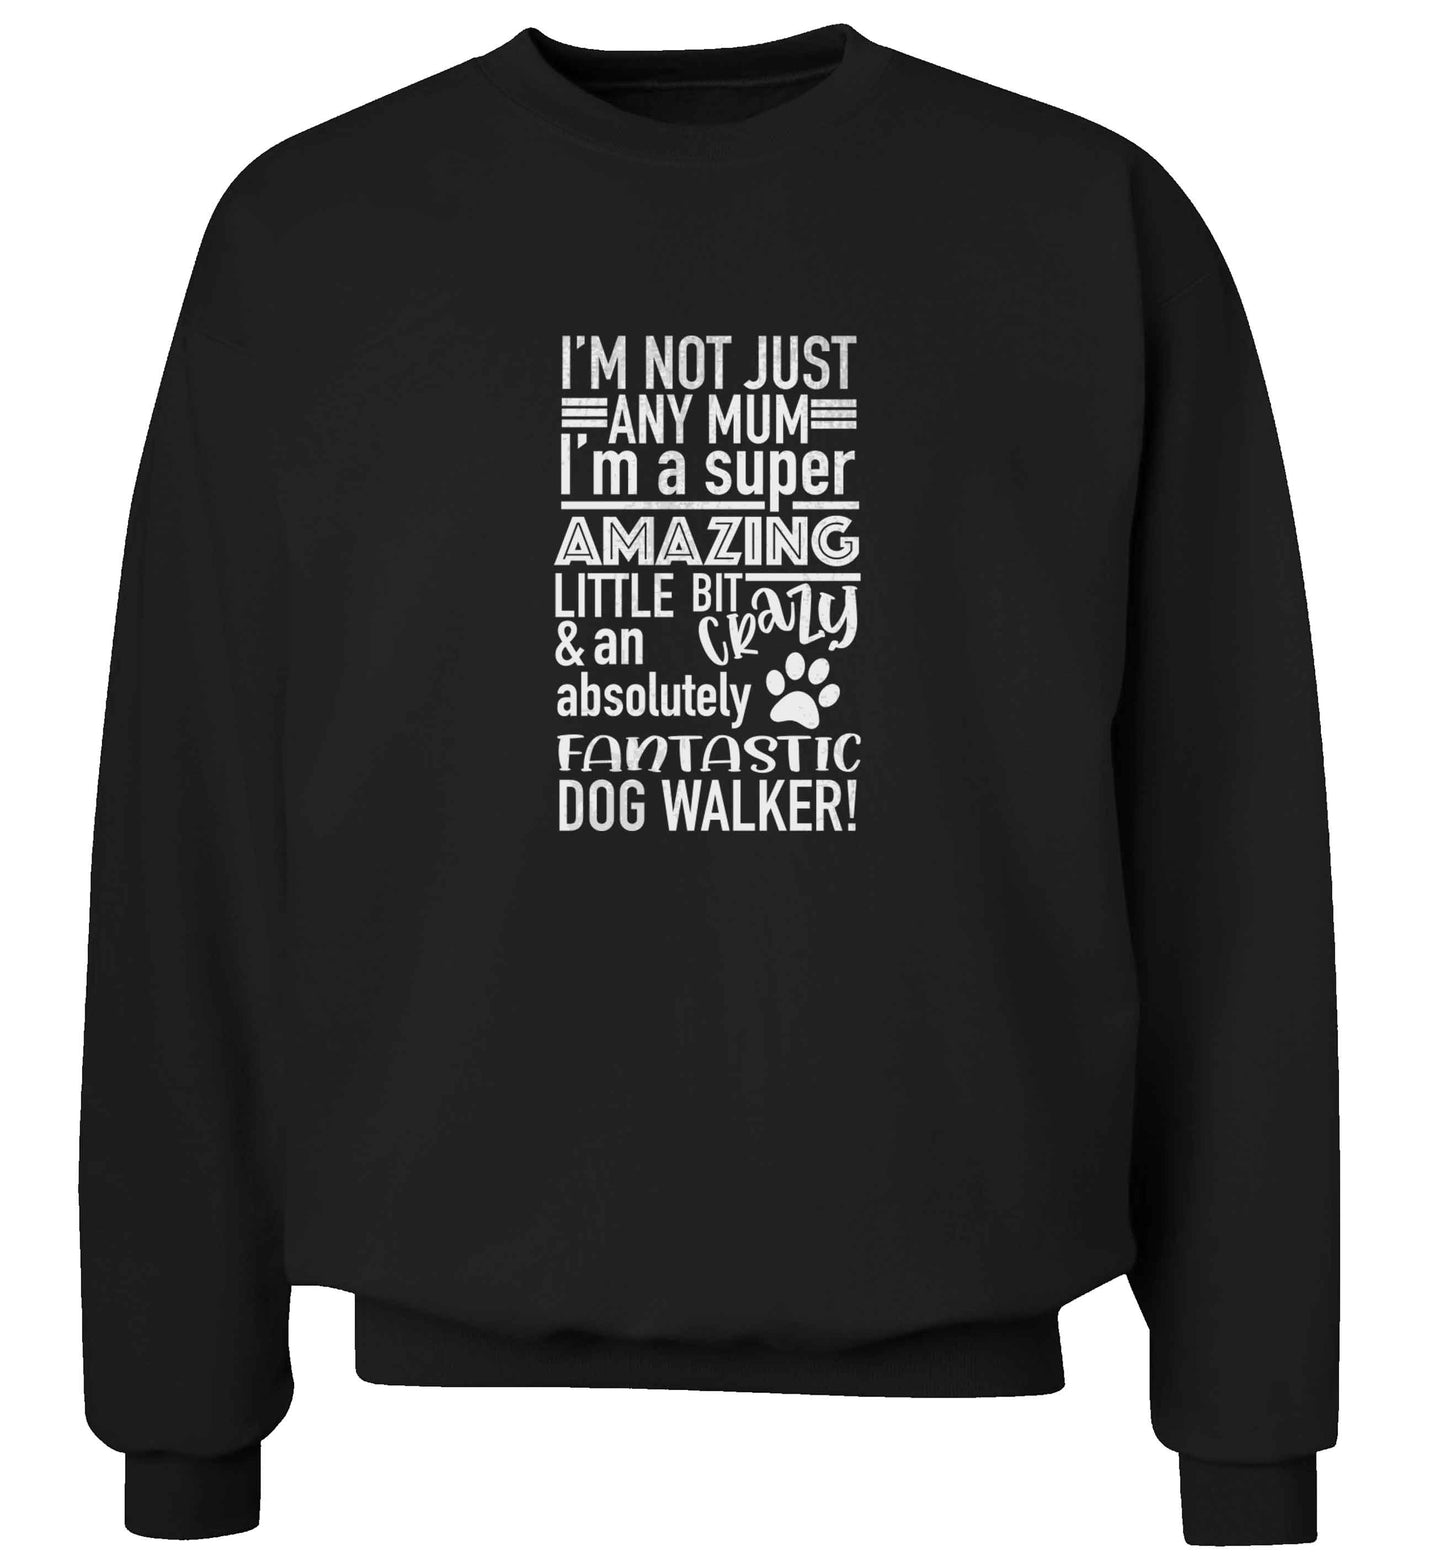 I'm not just any mum I'm a super amazing little bit crazy and an absolutely fantastic dog walker! adult's unisex black sweater 2XL